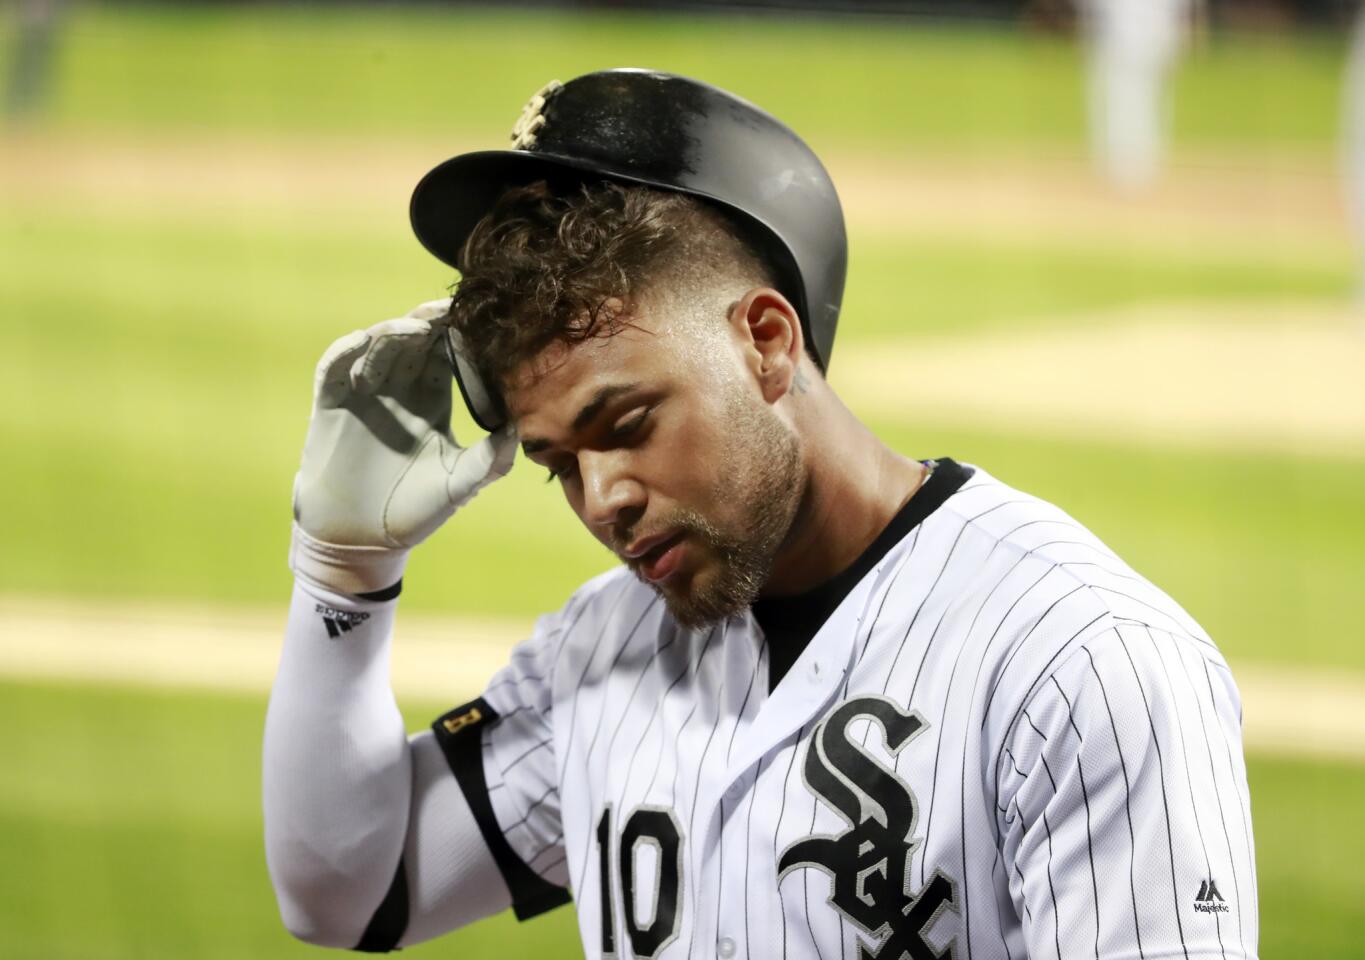 White Sox second baseman Yoan Moncada reacts after he struck out during the first inning against the Twins at Guaranteed Rate Field on Tuesday, June 26, 2018.